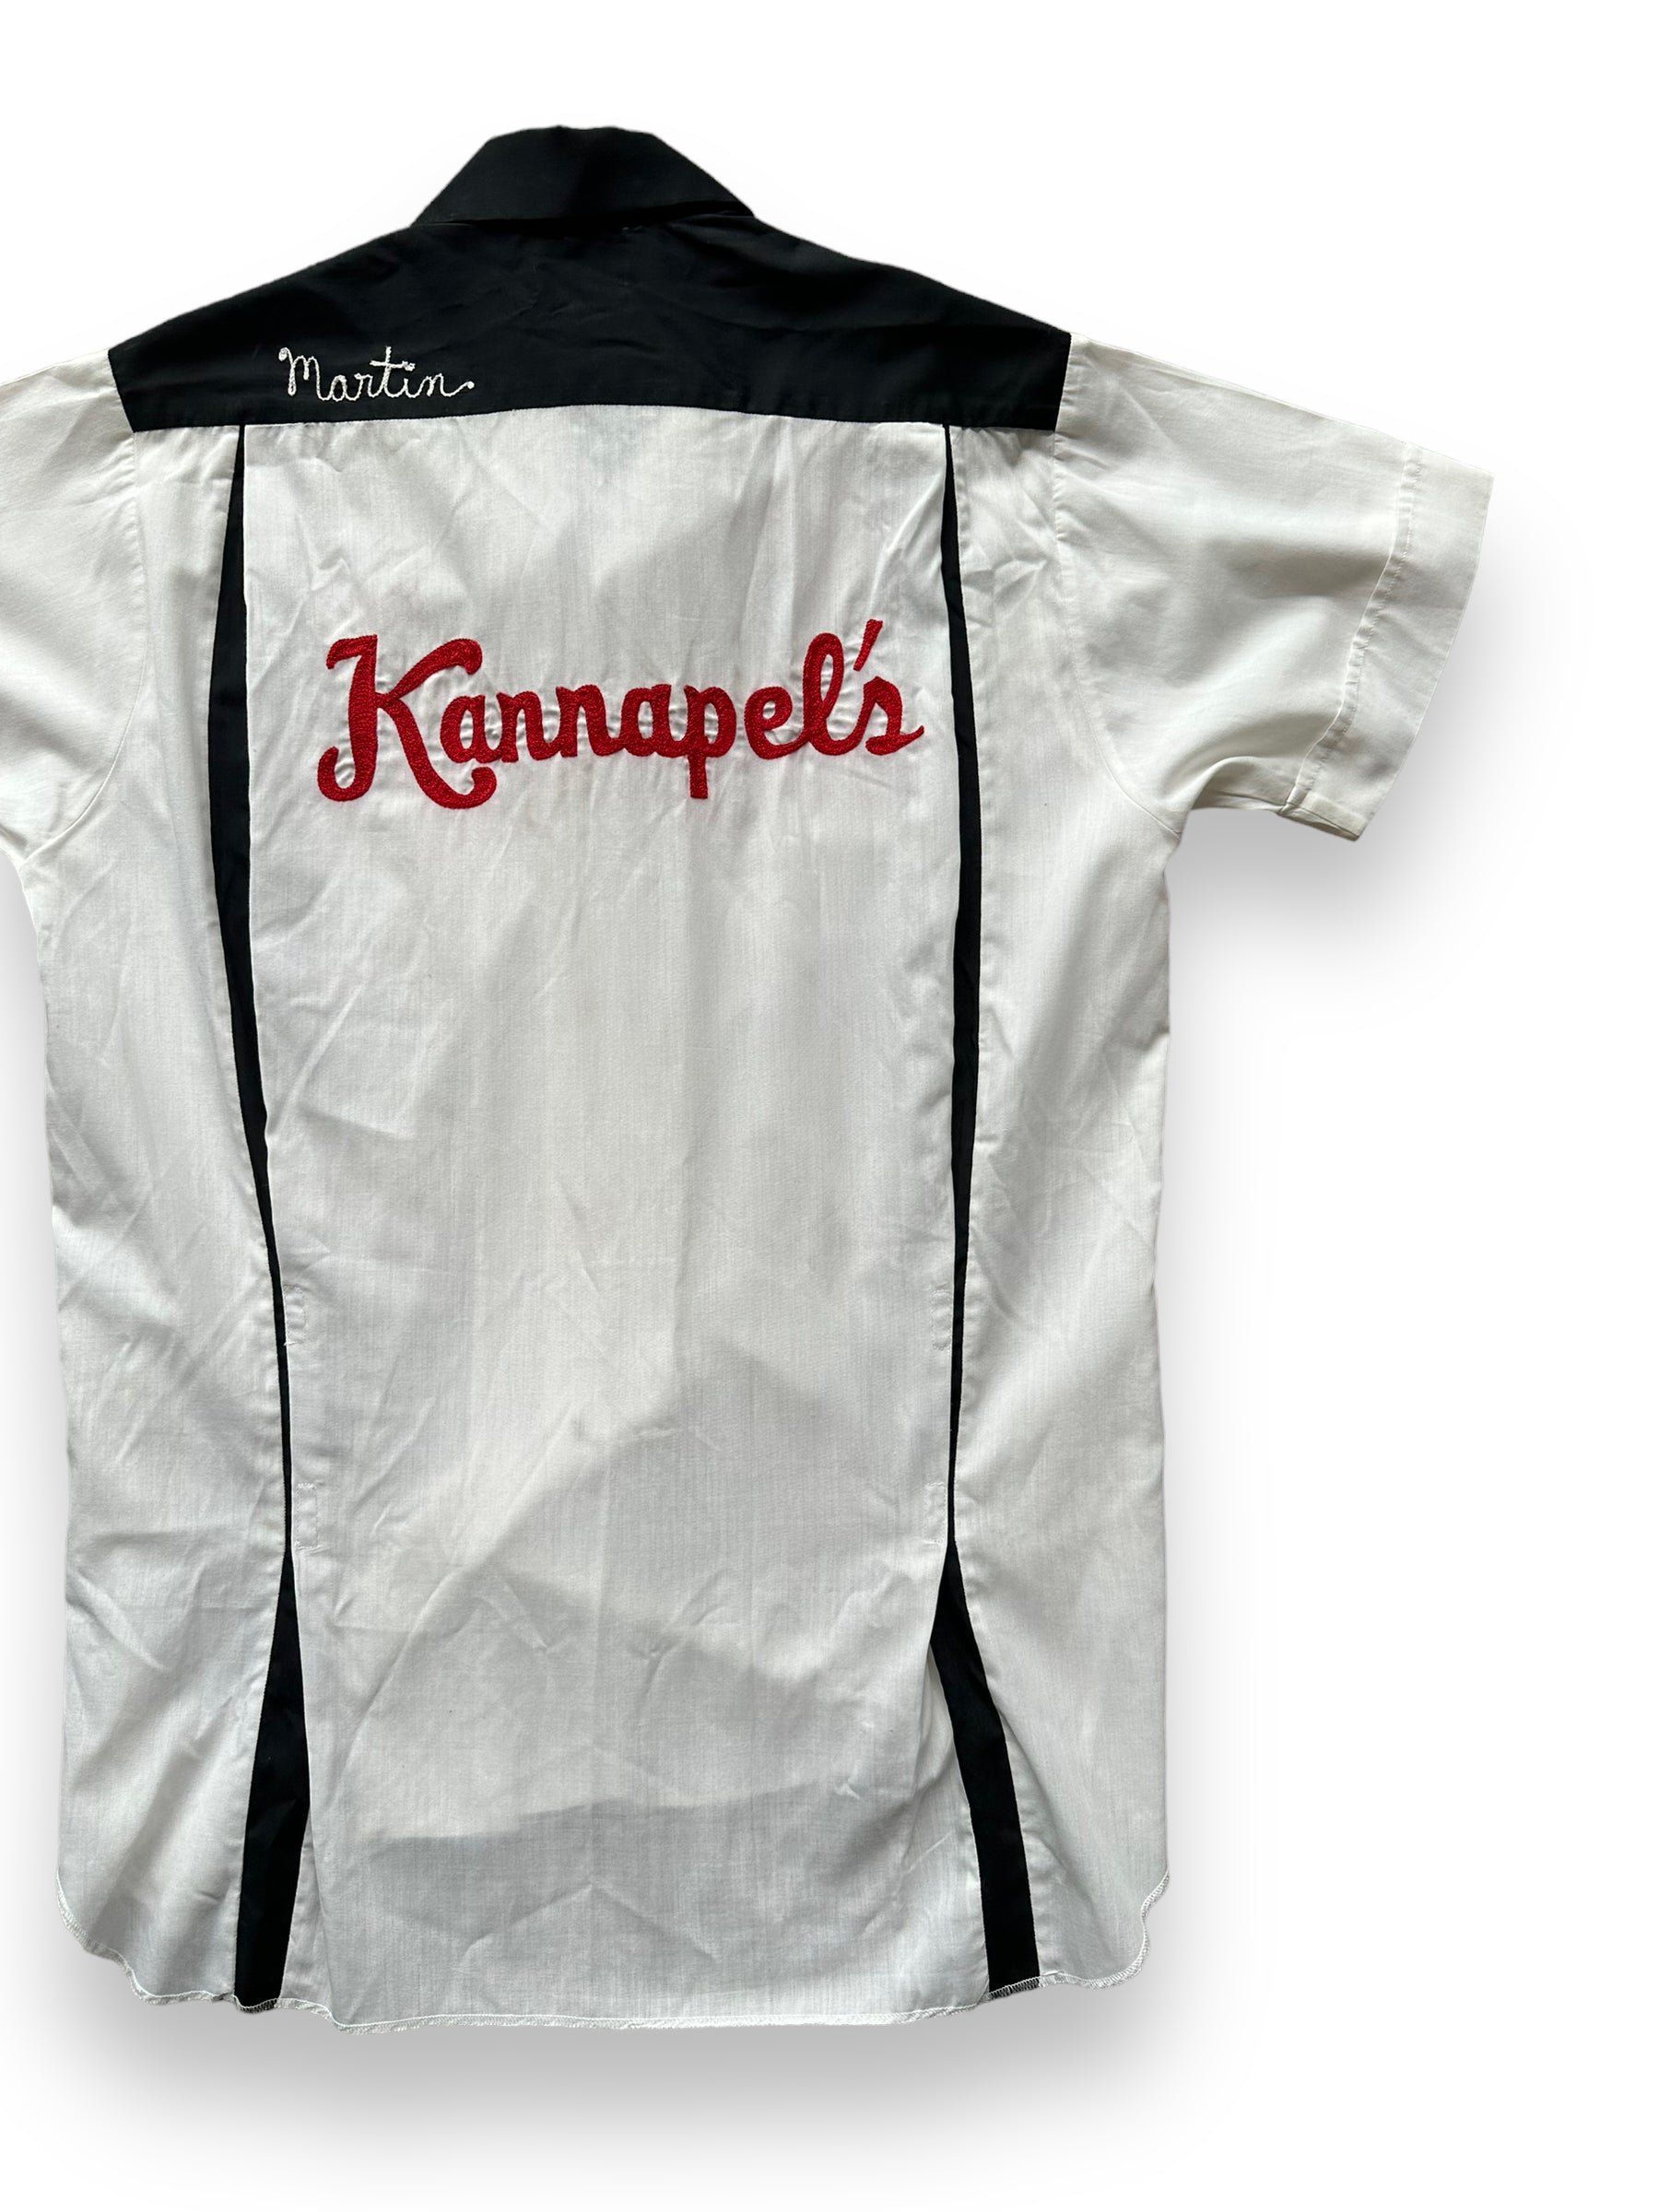 Back right of Vintage "Kannapel's" Chainstitched Bowling Shirt SZ 14 | Vintage Bowling Shirt Seattle | Barn Owl Vintage Seattle